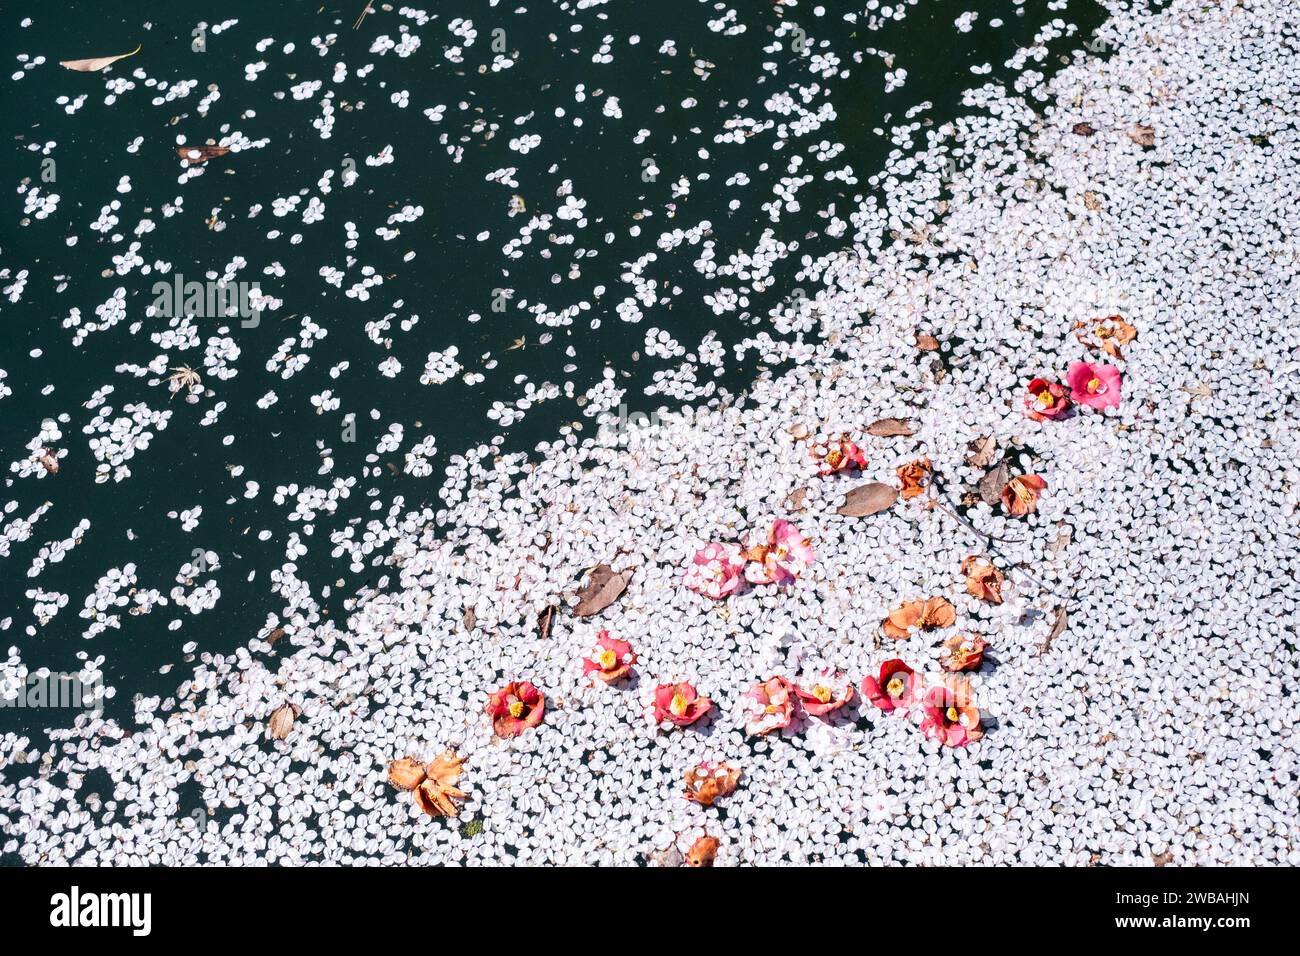 Fallen cherry blossom and camellia flowers on the surface of a river in Kanazawa, Japan. Stock Photo